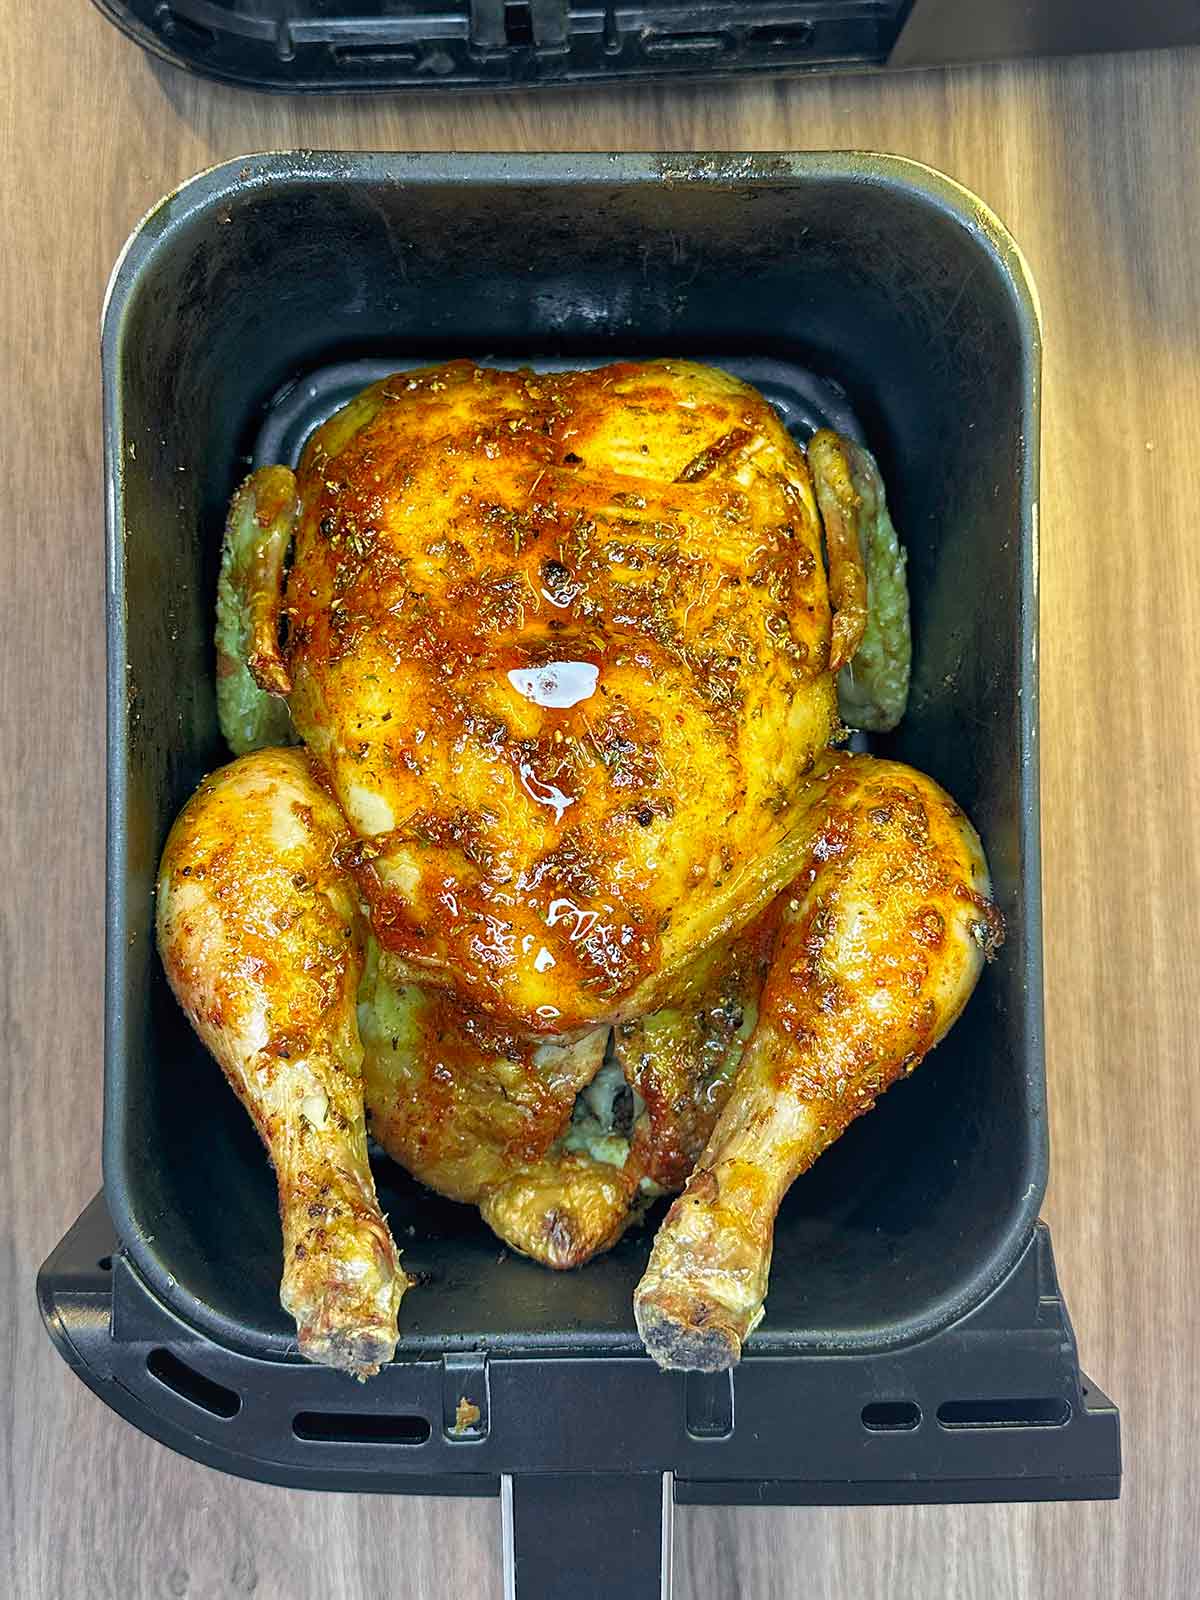 The remaining rub added to the chicken.